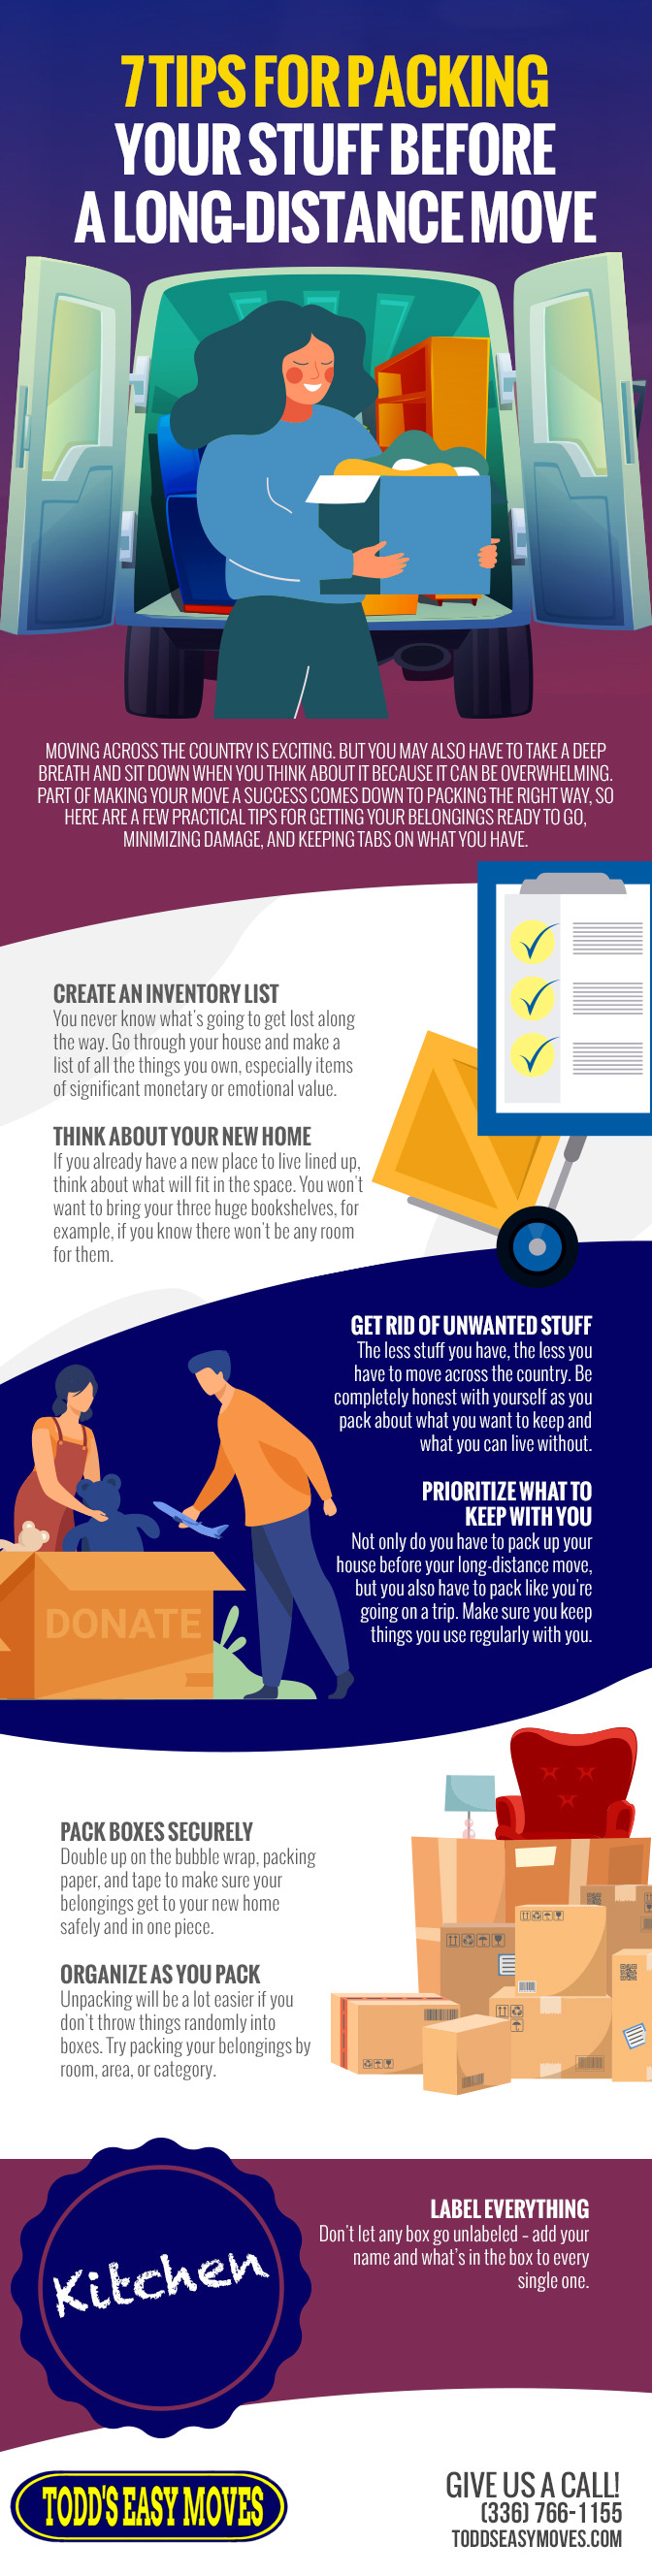 https://toddseasymoves.com/moving-services-blog/7-tips-for-packing-your-stuff-before-a-long-distance-move-infographic/